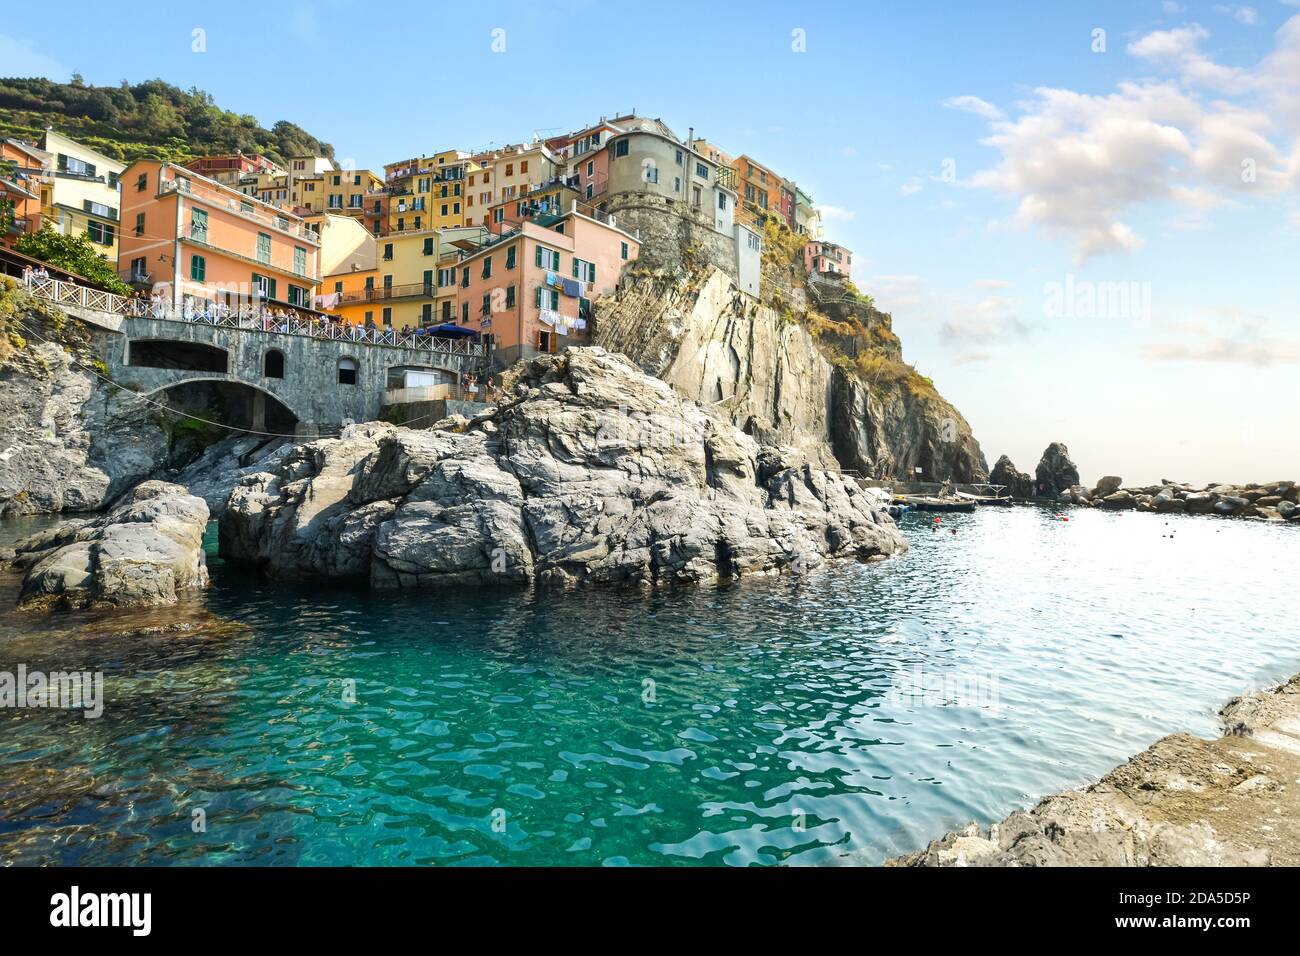 The turquoise bay and swimming area at the village of Manarola, one of the five villages of the Cinque Terre, a World Heritage Site. Stock Photo